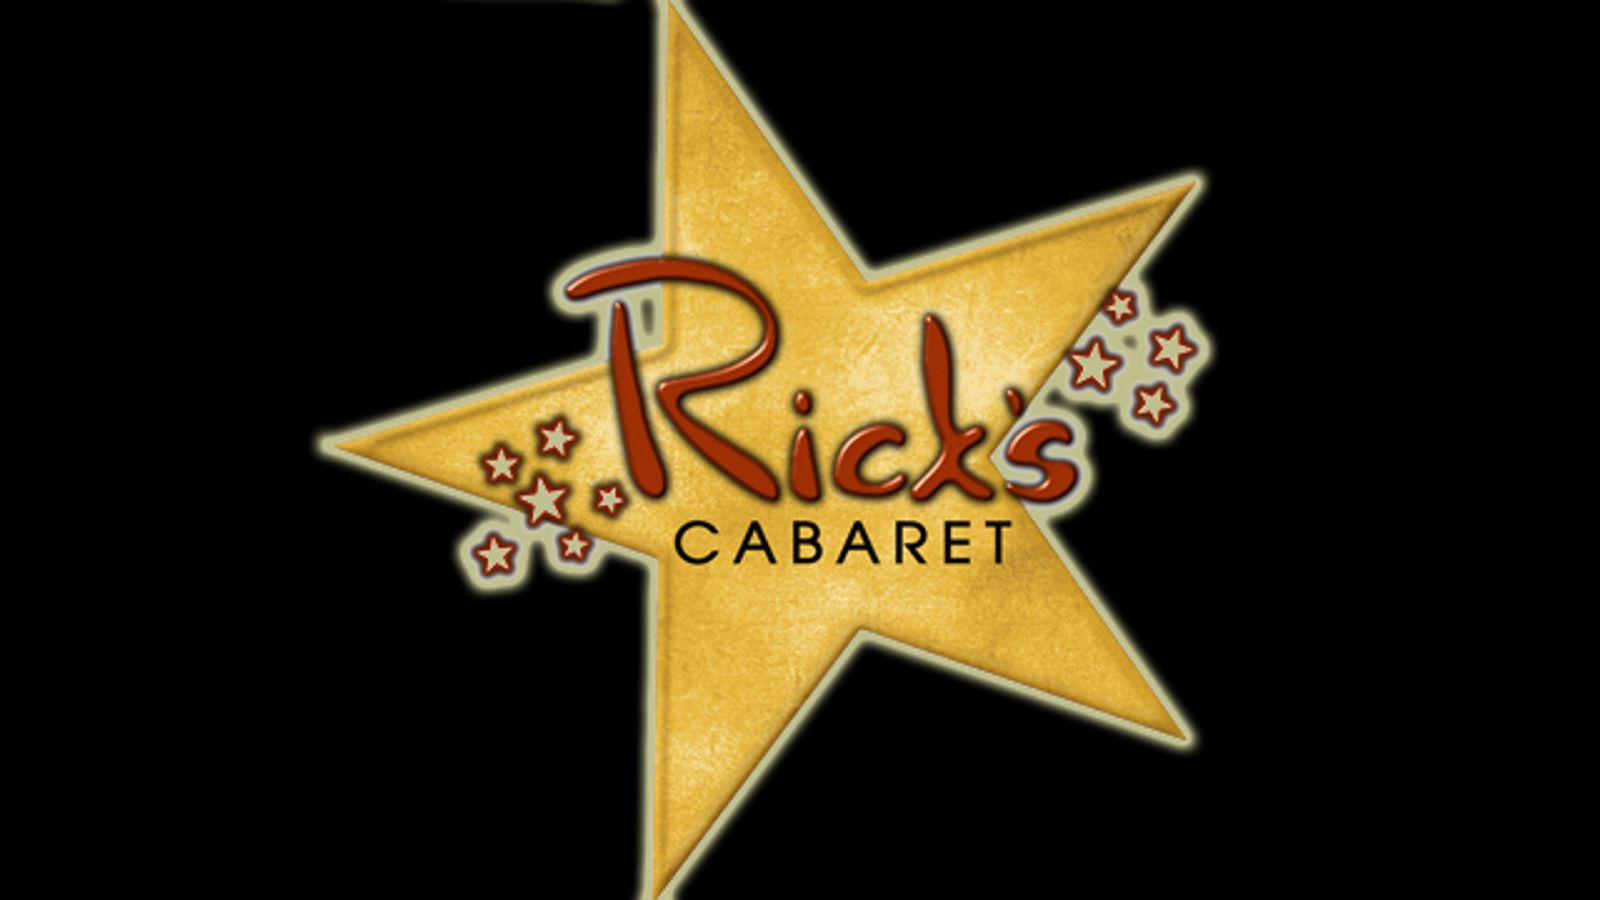 Rick's Cabaret Provides Q2 Outlook, Acquisition Strategy Update